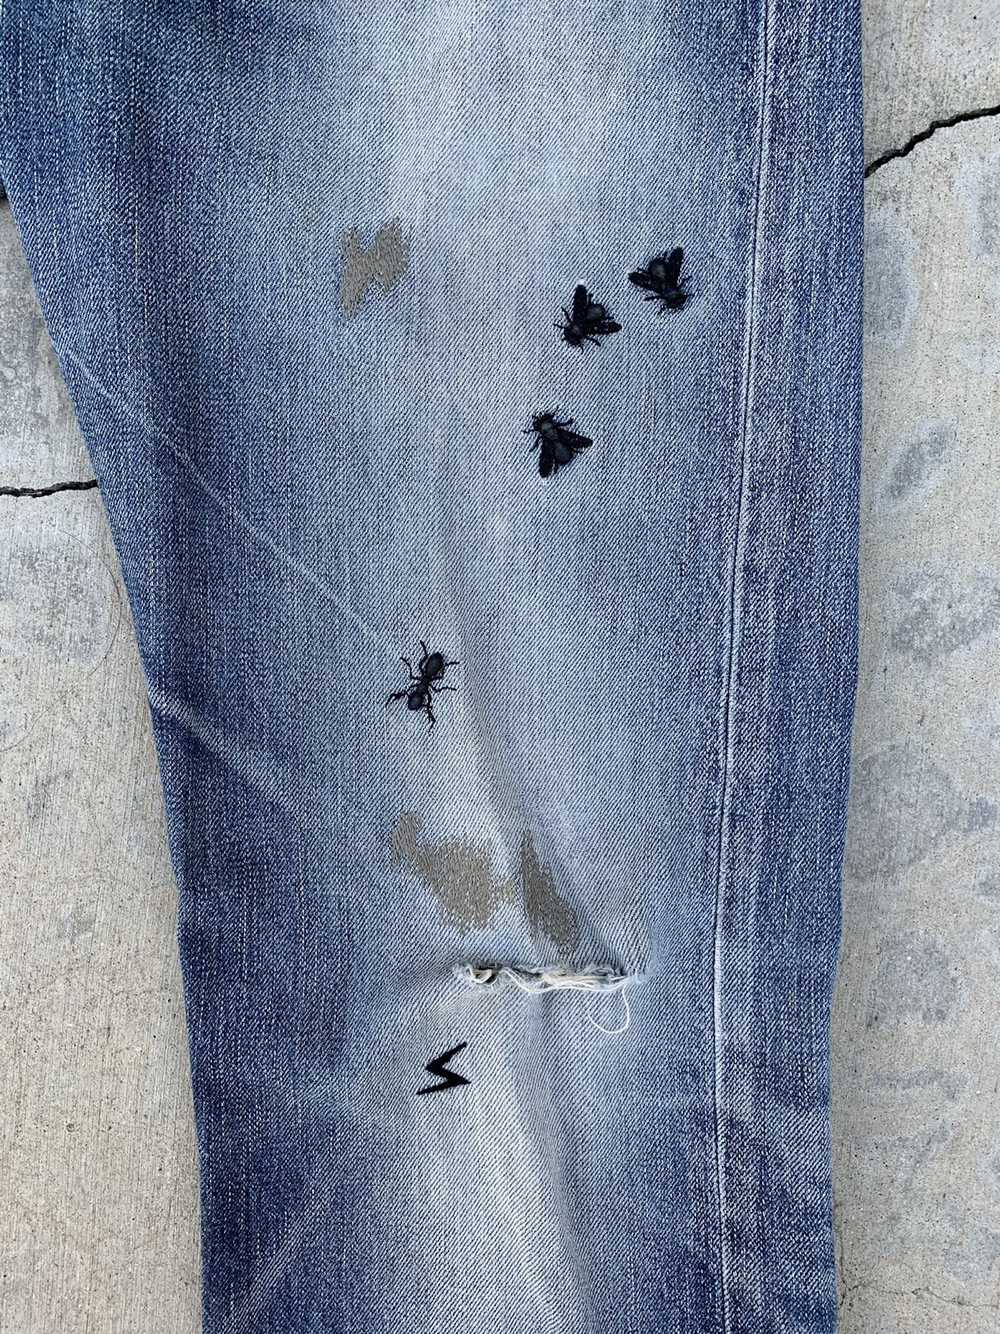 Undercover Undercover Bug Denim 06AW - image 3